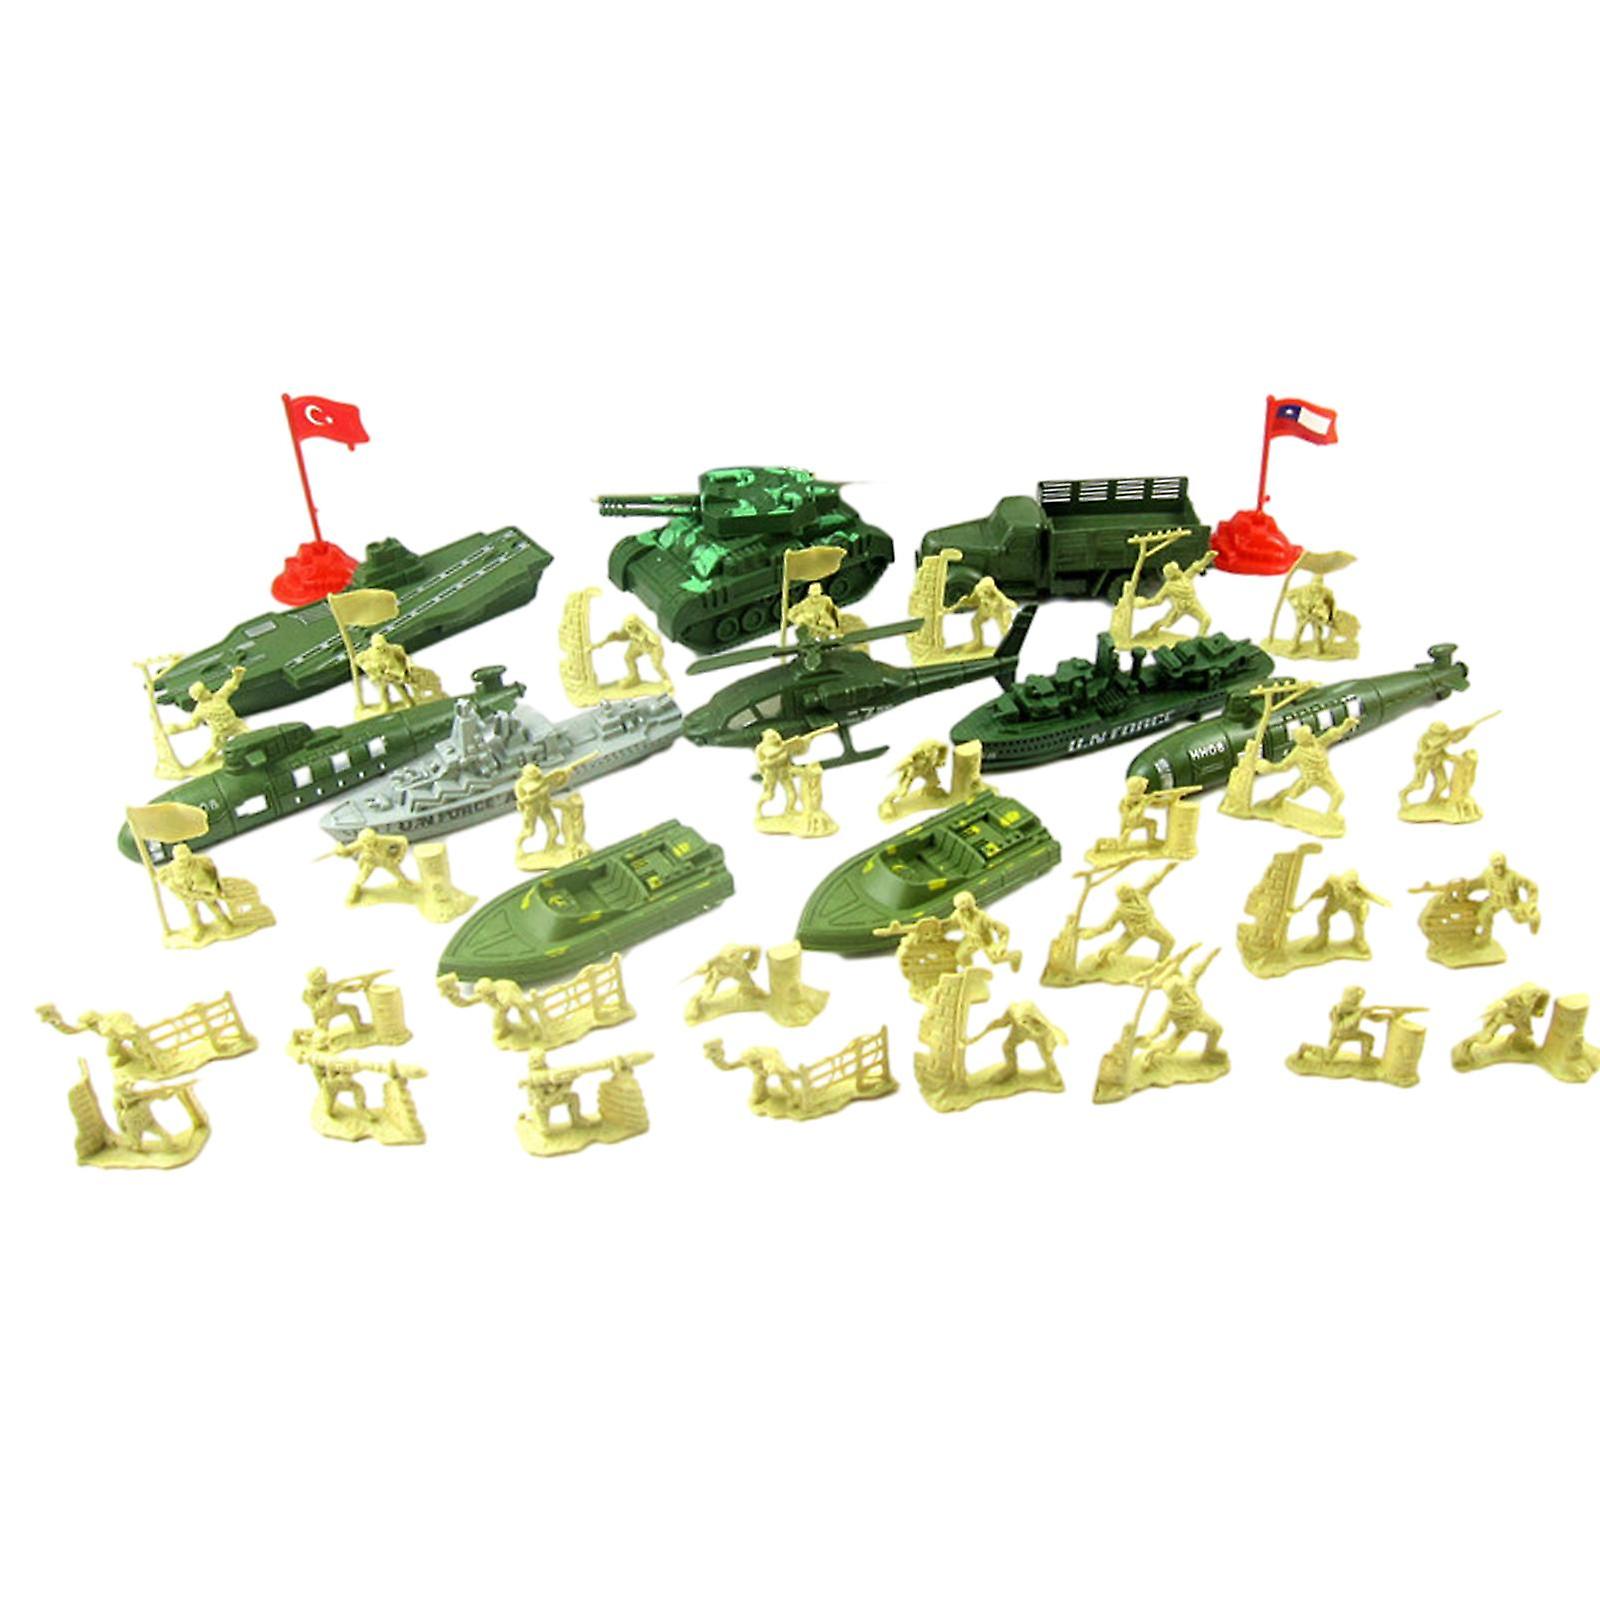 52 Pieces Soldier Figures Toys Mini Layout Playset For Adults Teens Children A